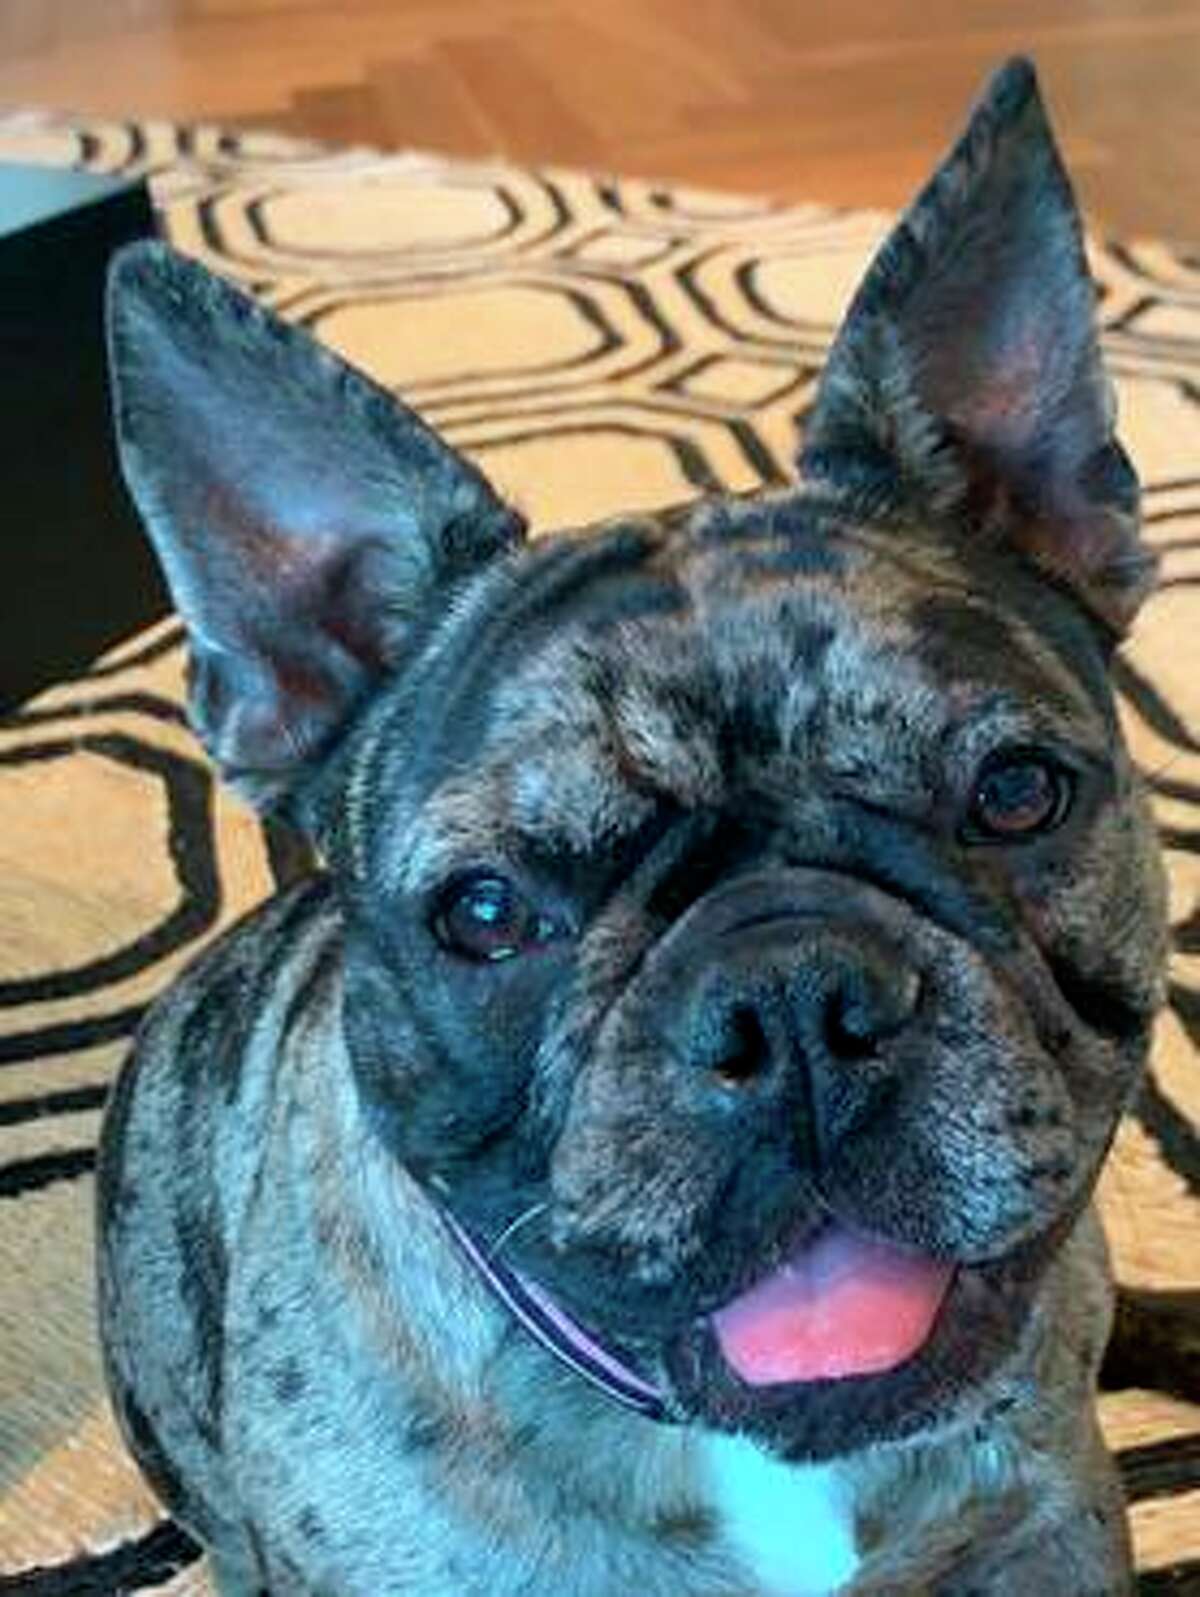 Rosie, a bulldog puppy, was on a walk with her owner near Broderick and Beach streets in San Francisco’s Marina district when someone violently stole the dog, police said.